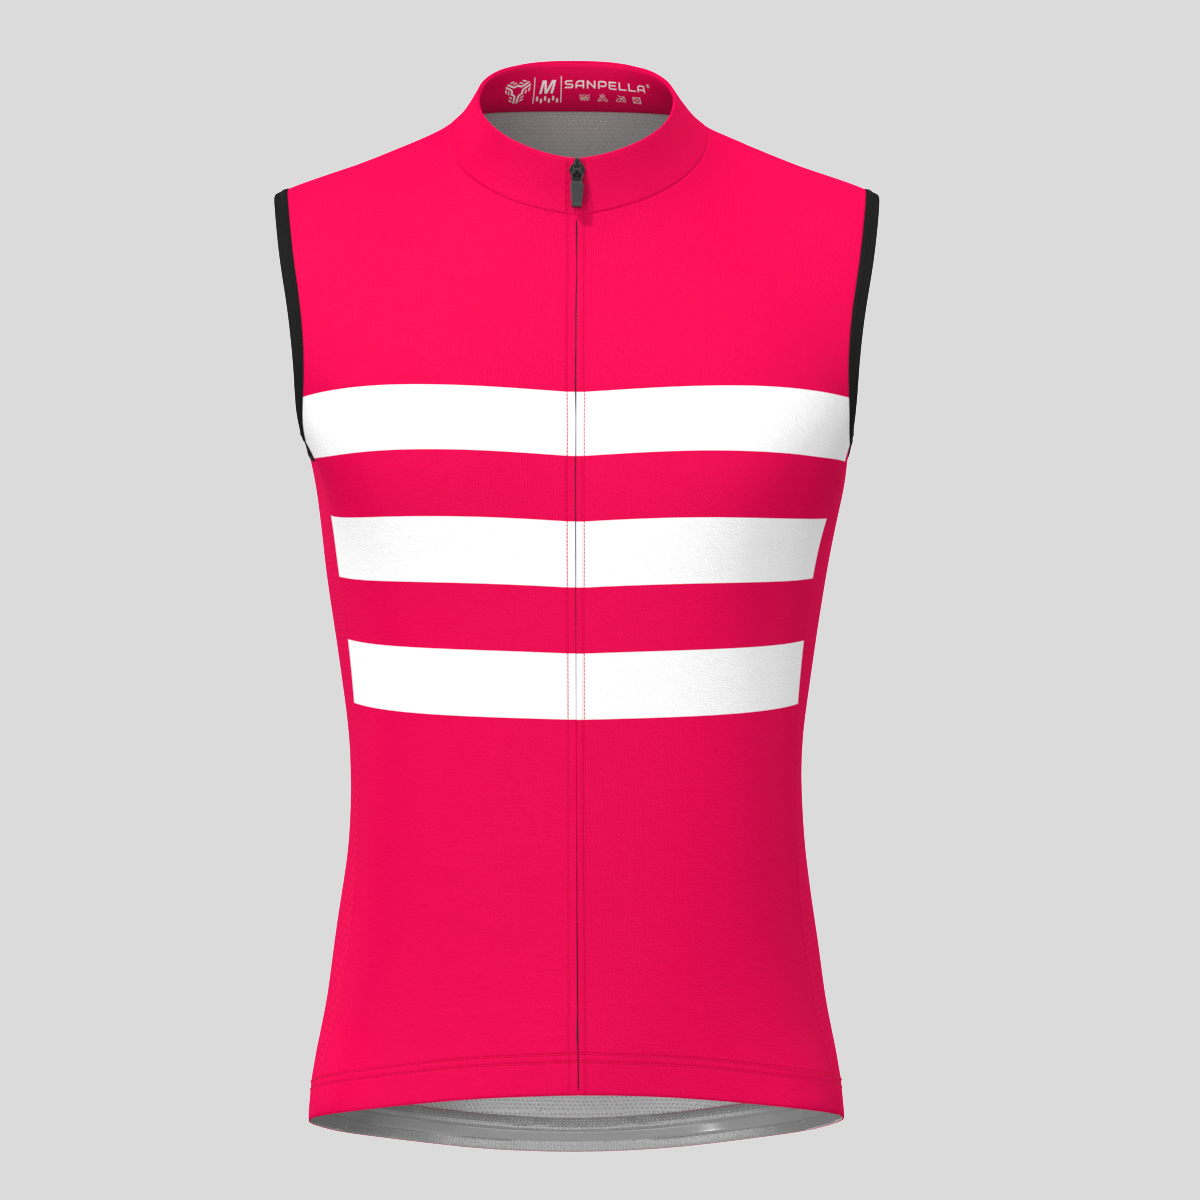 Men's Classic Stripes Cycling Jersey - Jester red